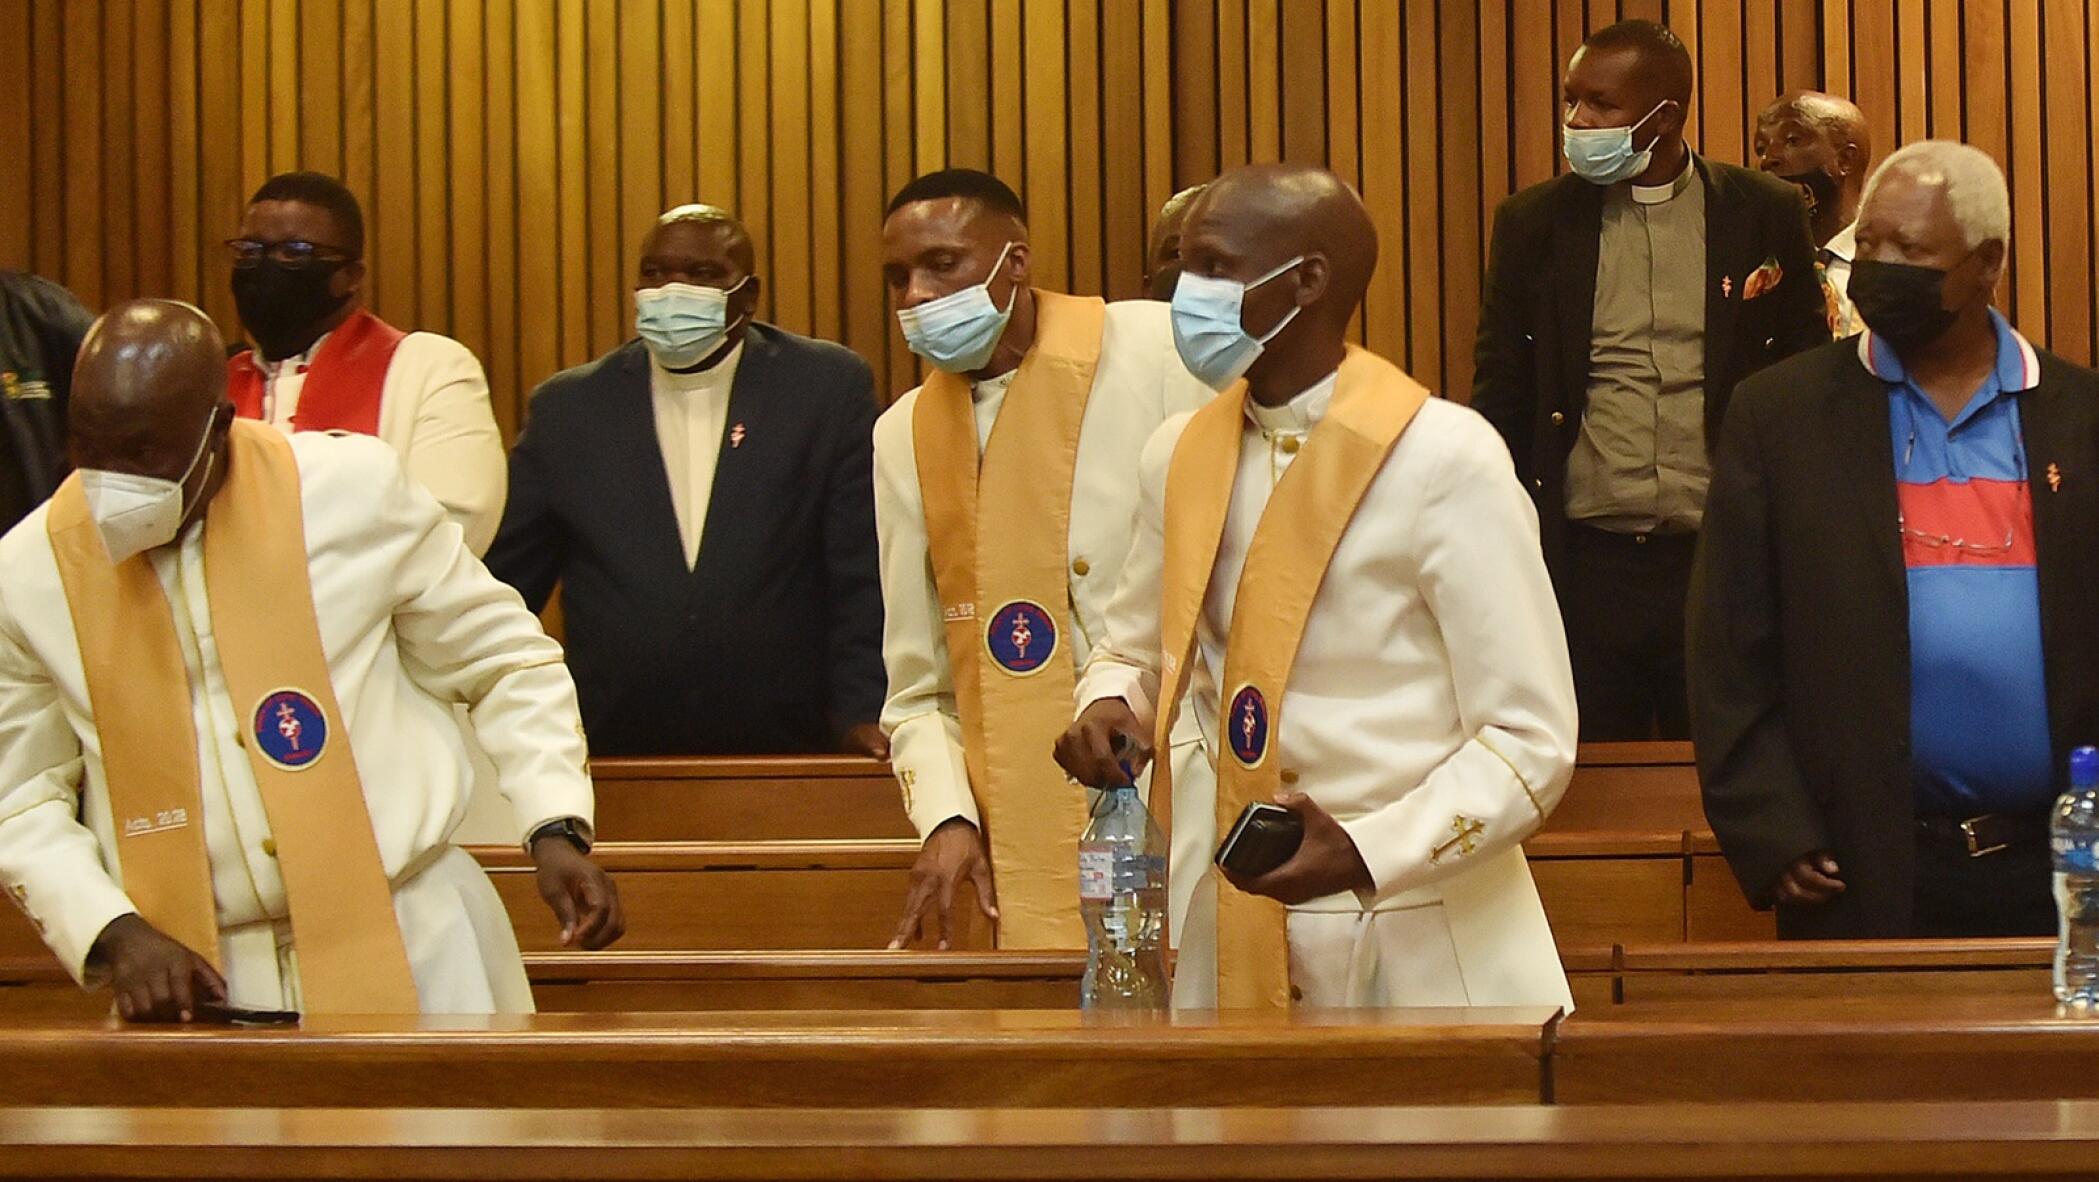 Clergymen in a courtroom.